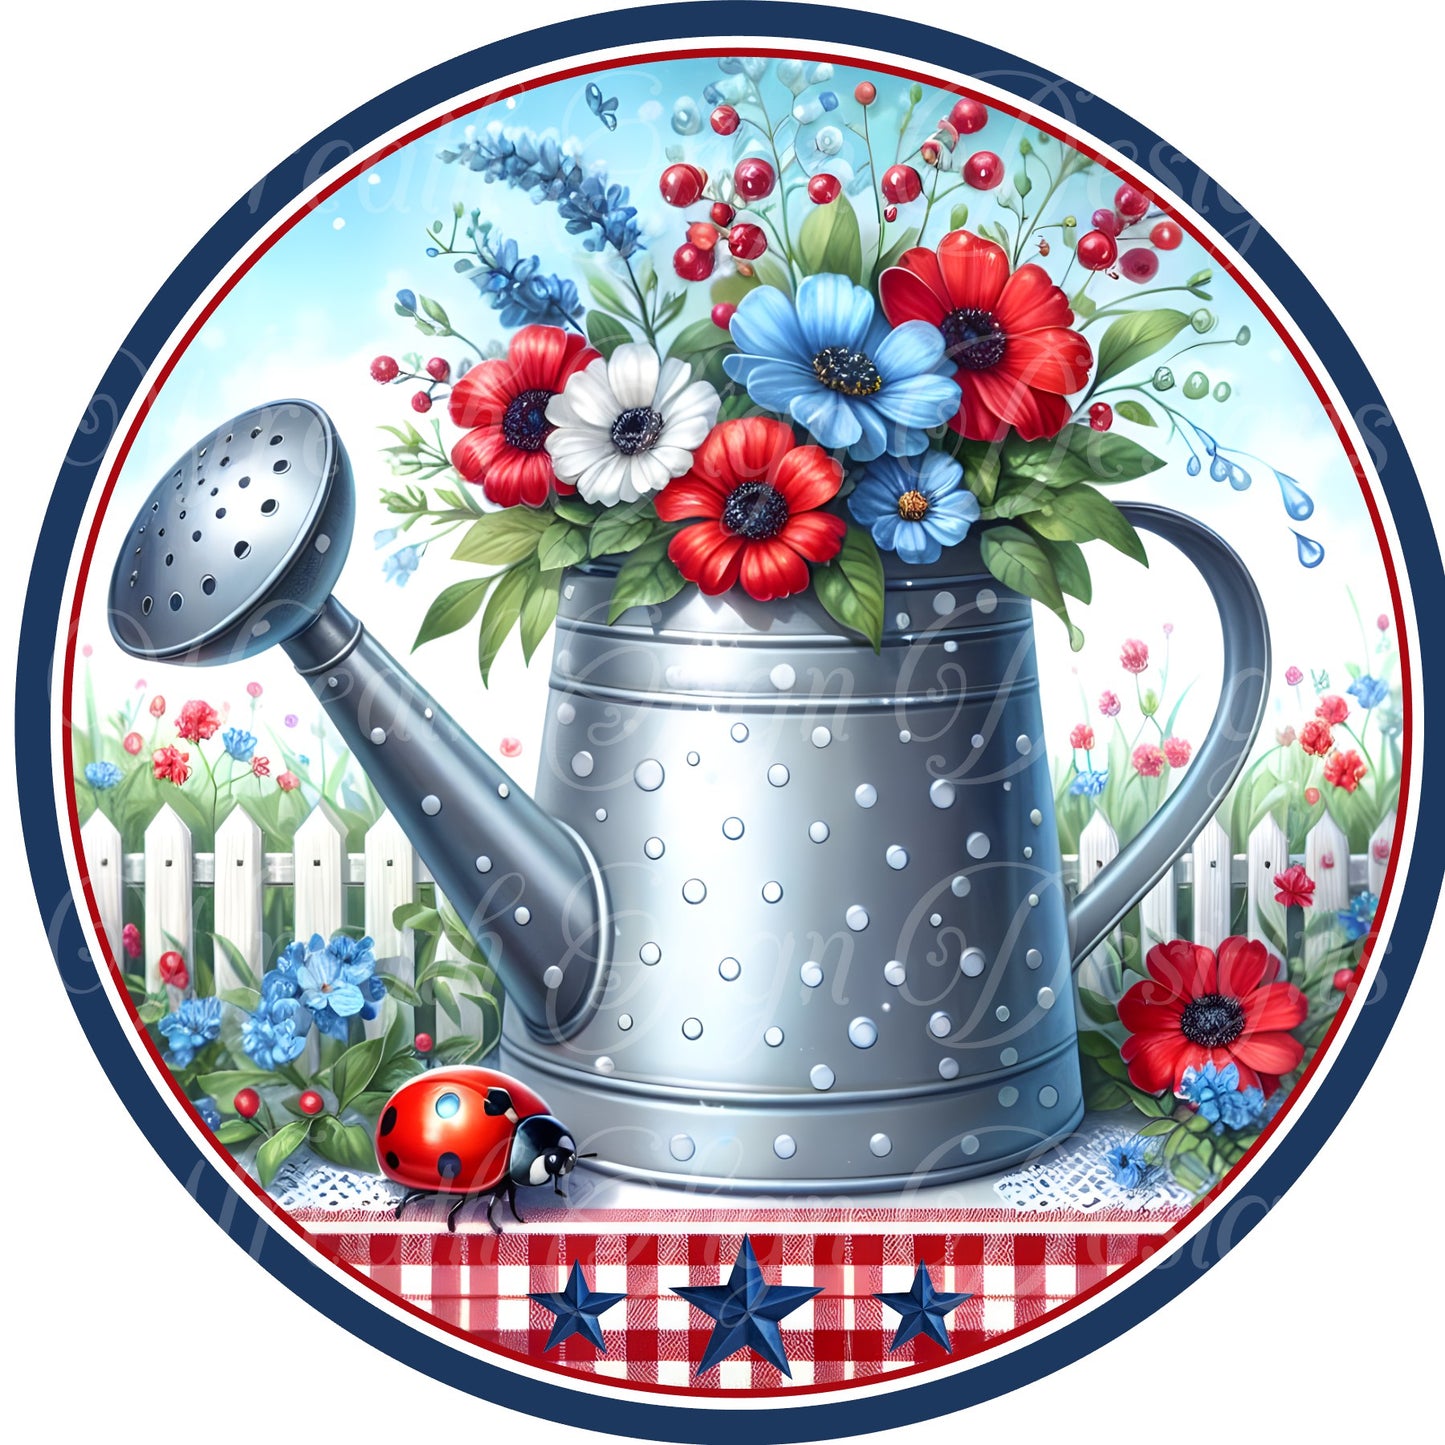 Red white and blue flowers, Summertime flowers and watercan freedom. 4th of july metal sign  Round sign, Wreath attachment, Wreath center